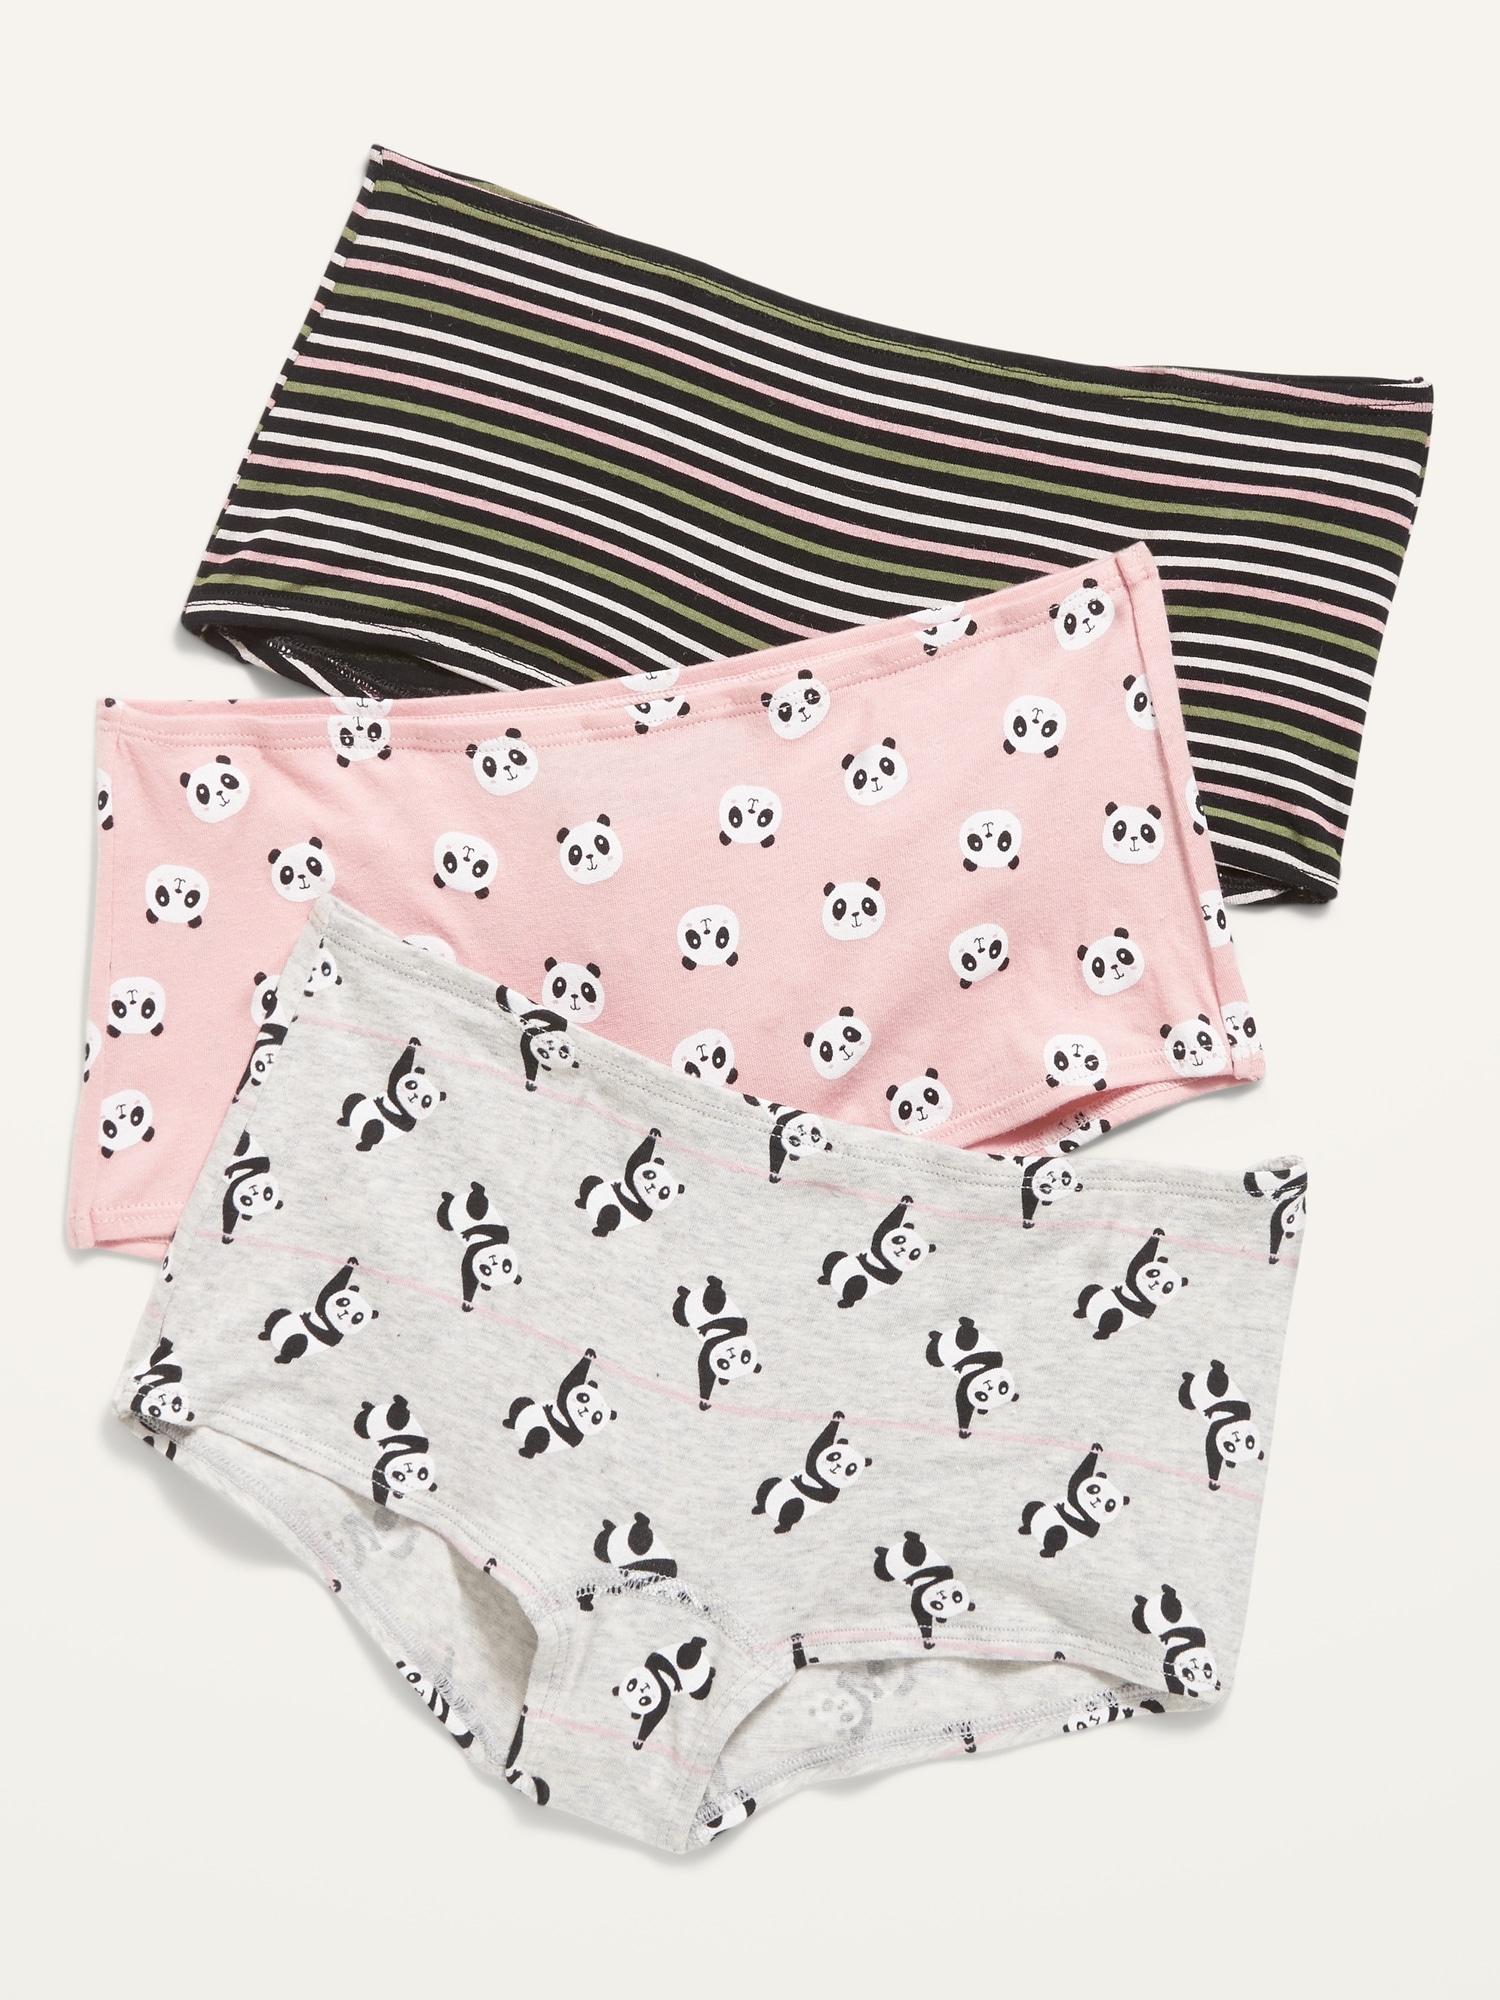 Old Navy Stretch-to-Fit Boyshorts Underwear 10-Pack for Girls